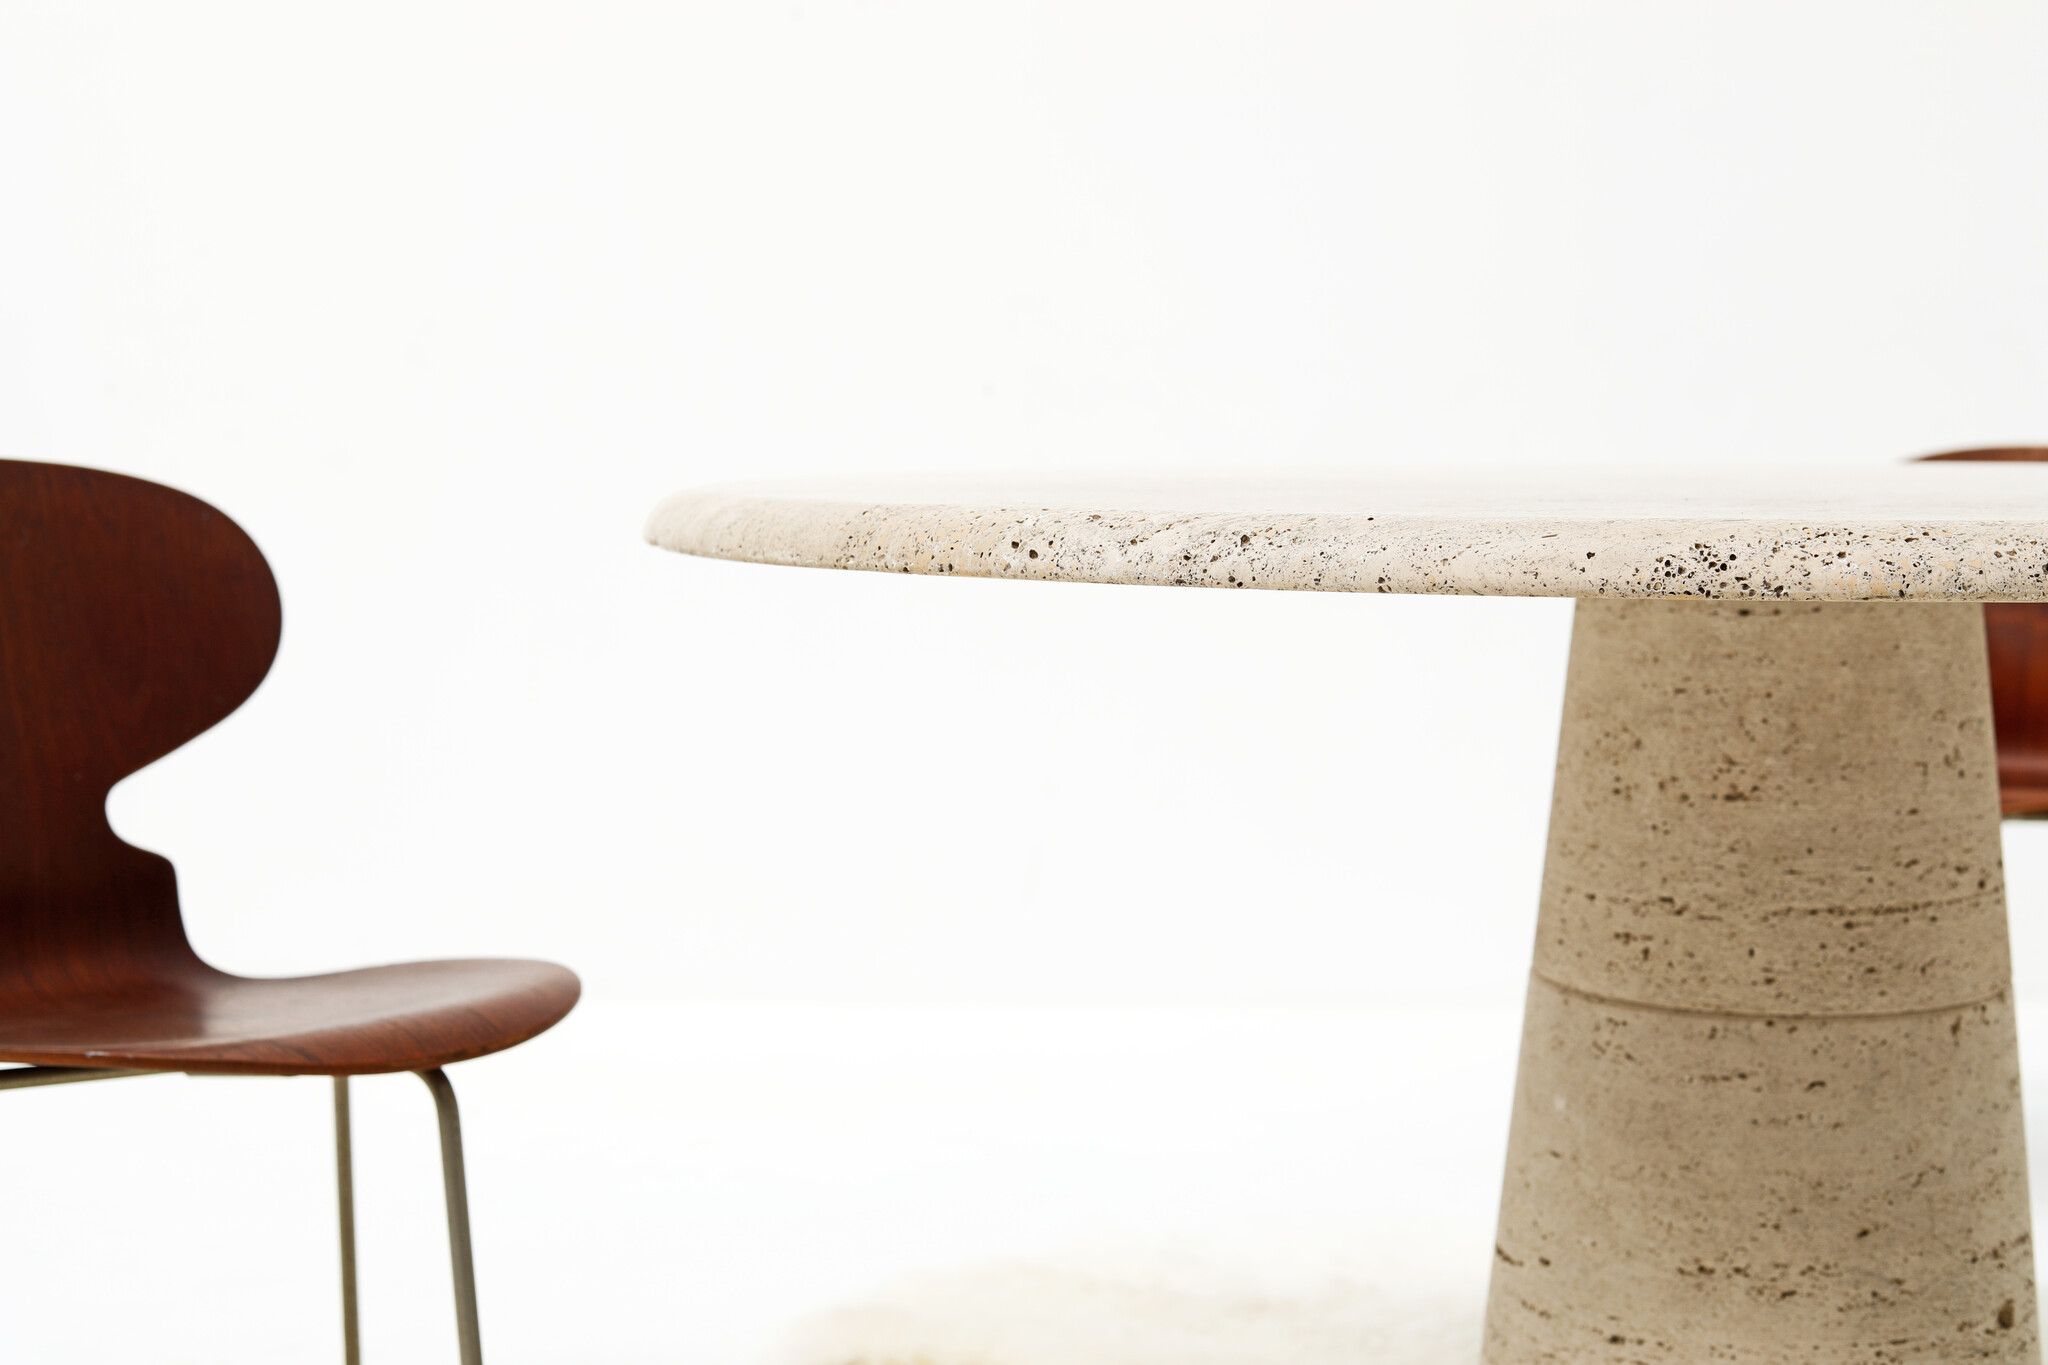 Round travertine dining table by UP & UP, 1970s